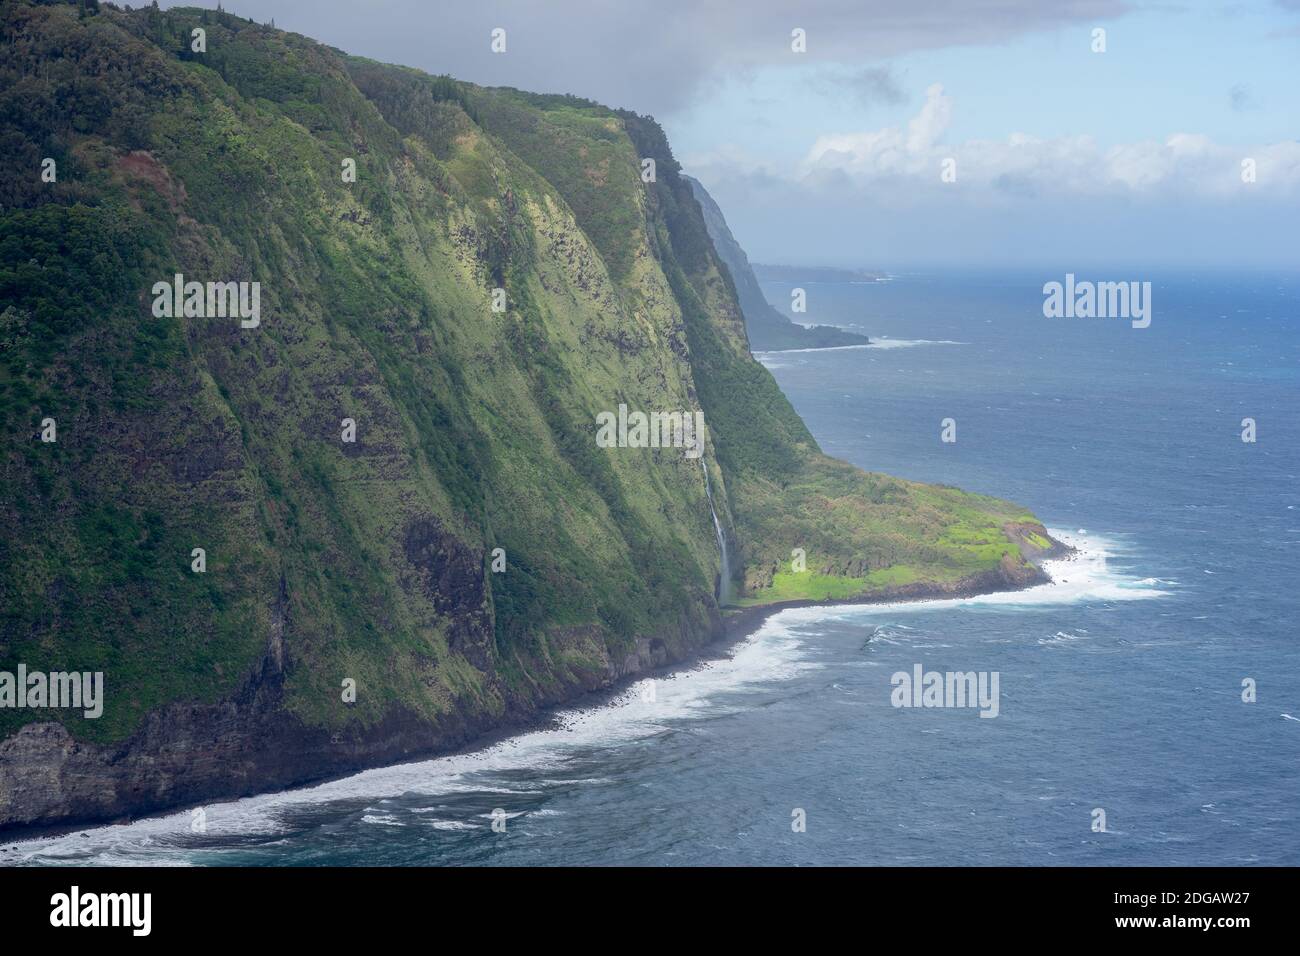 Cliffs north of Waipio valley, viewed from above on partially cloudy day - Hawaii island, Hawaii, USA Stock Photo